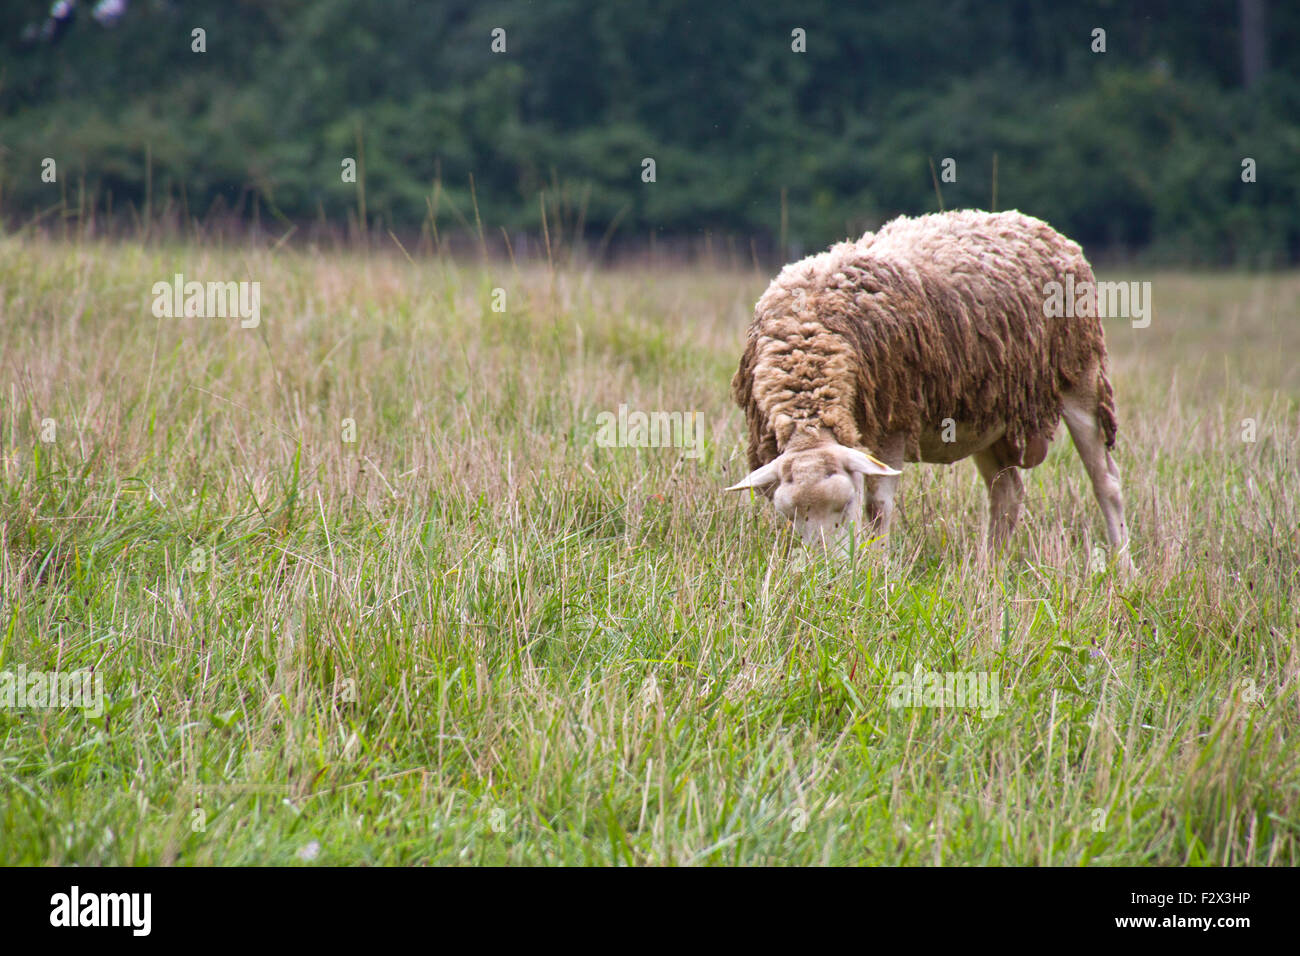 A lone, shaggy sheep grazes placidly in a meadow of wild grass with a forest behind it in late summer Stock Photo